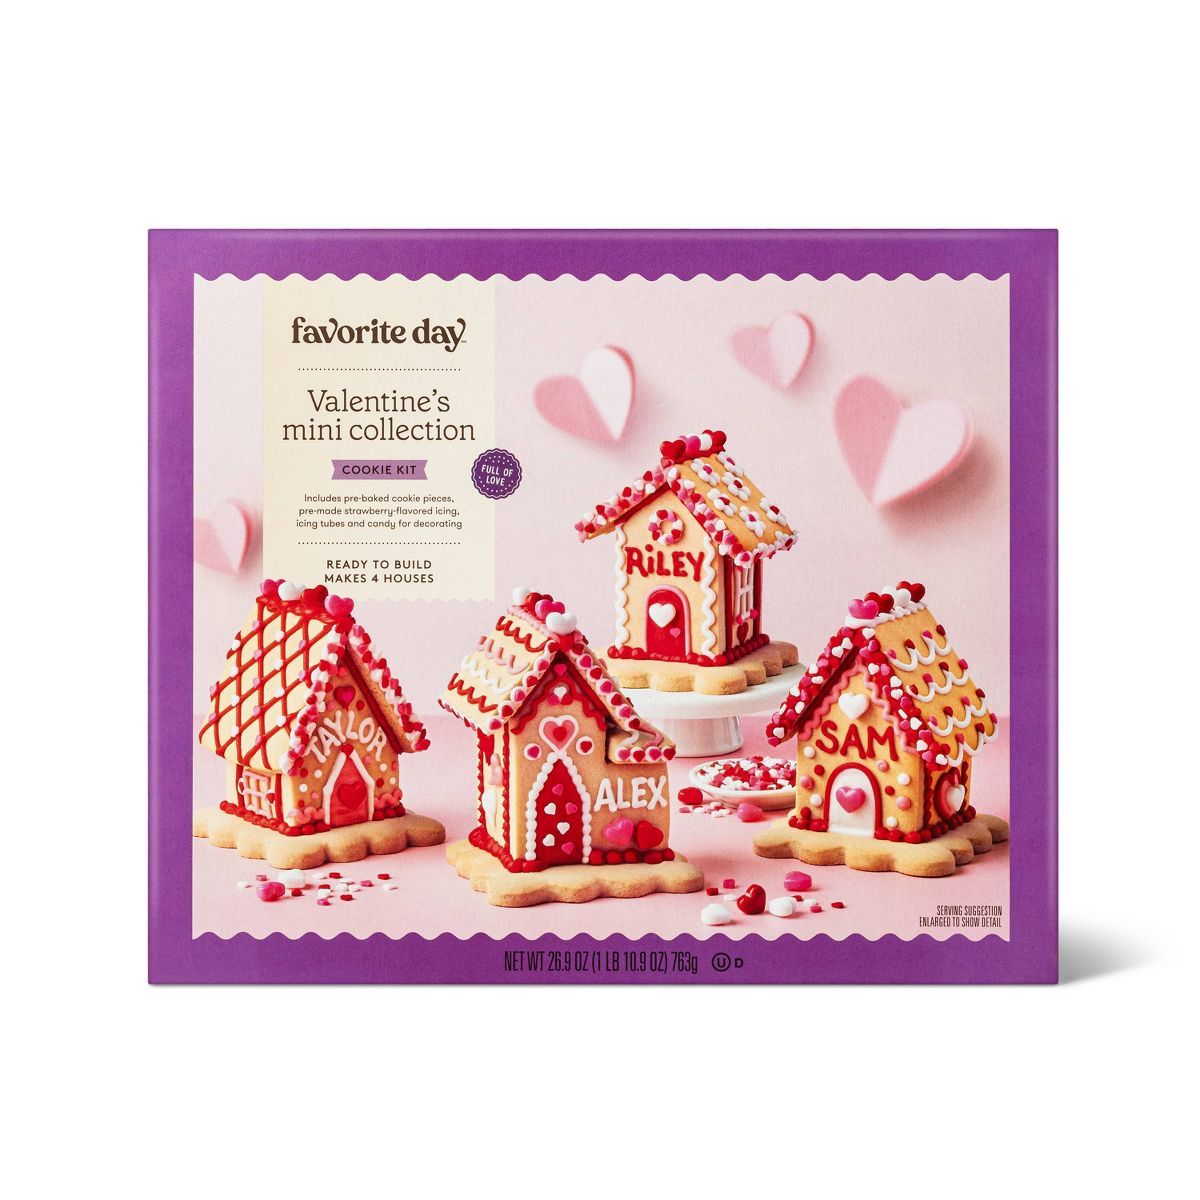 Valentines Mini Collection Cookie House Kit - 26.9oz - Favorite Day™ | Target